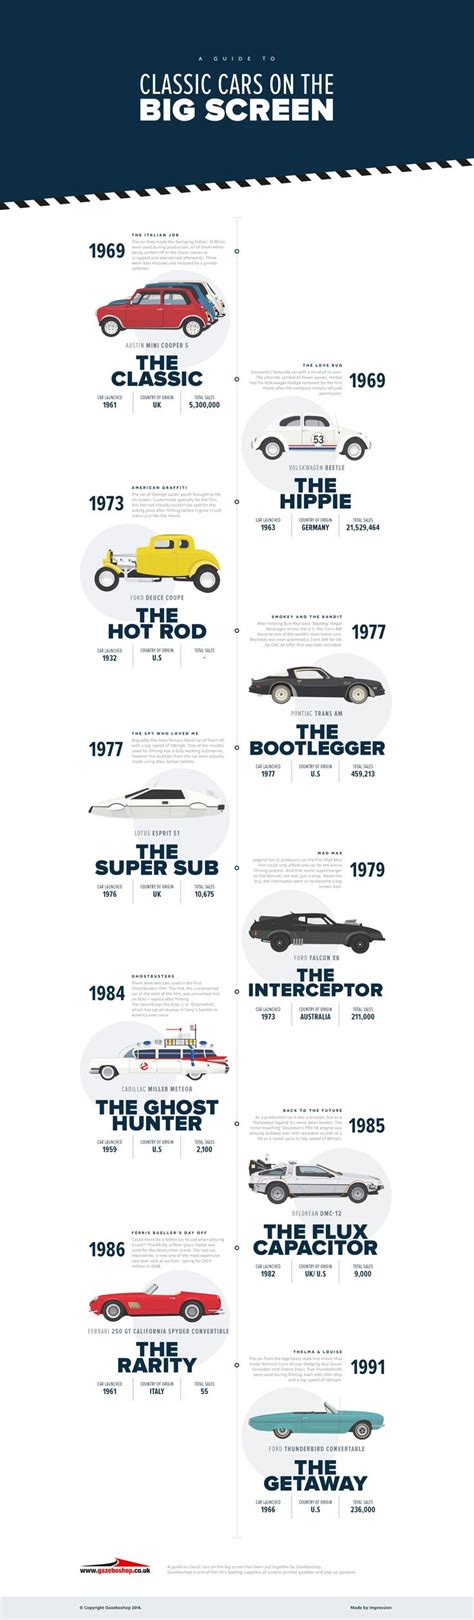 A Guide To Classic Cars On The Big Screen By Gazeboshop Timeline